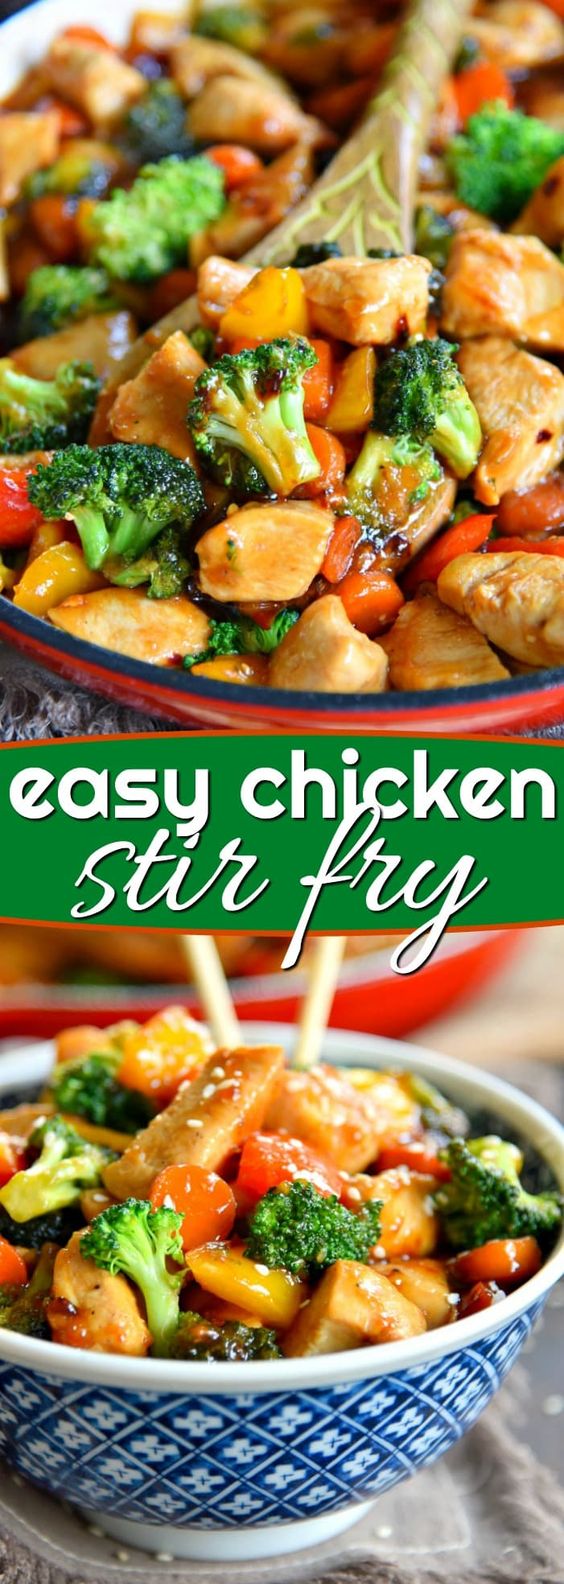 This easy Chicken Stir Fry recipe is loaded with fresh veggies and the most delicious sauce made with honey, soy sauce, and toasted sesame oil! This healthy recipe takes 20 minutes to make and will wow your family with it's amazing flavor! // Mom On Timeout #dinner #entree #maindish #chicken #veggies #vegetables #stirfry #easy #quick #recipe #recipes #momontimeout #ad